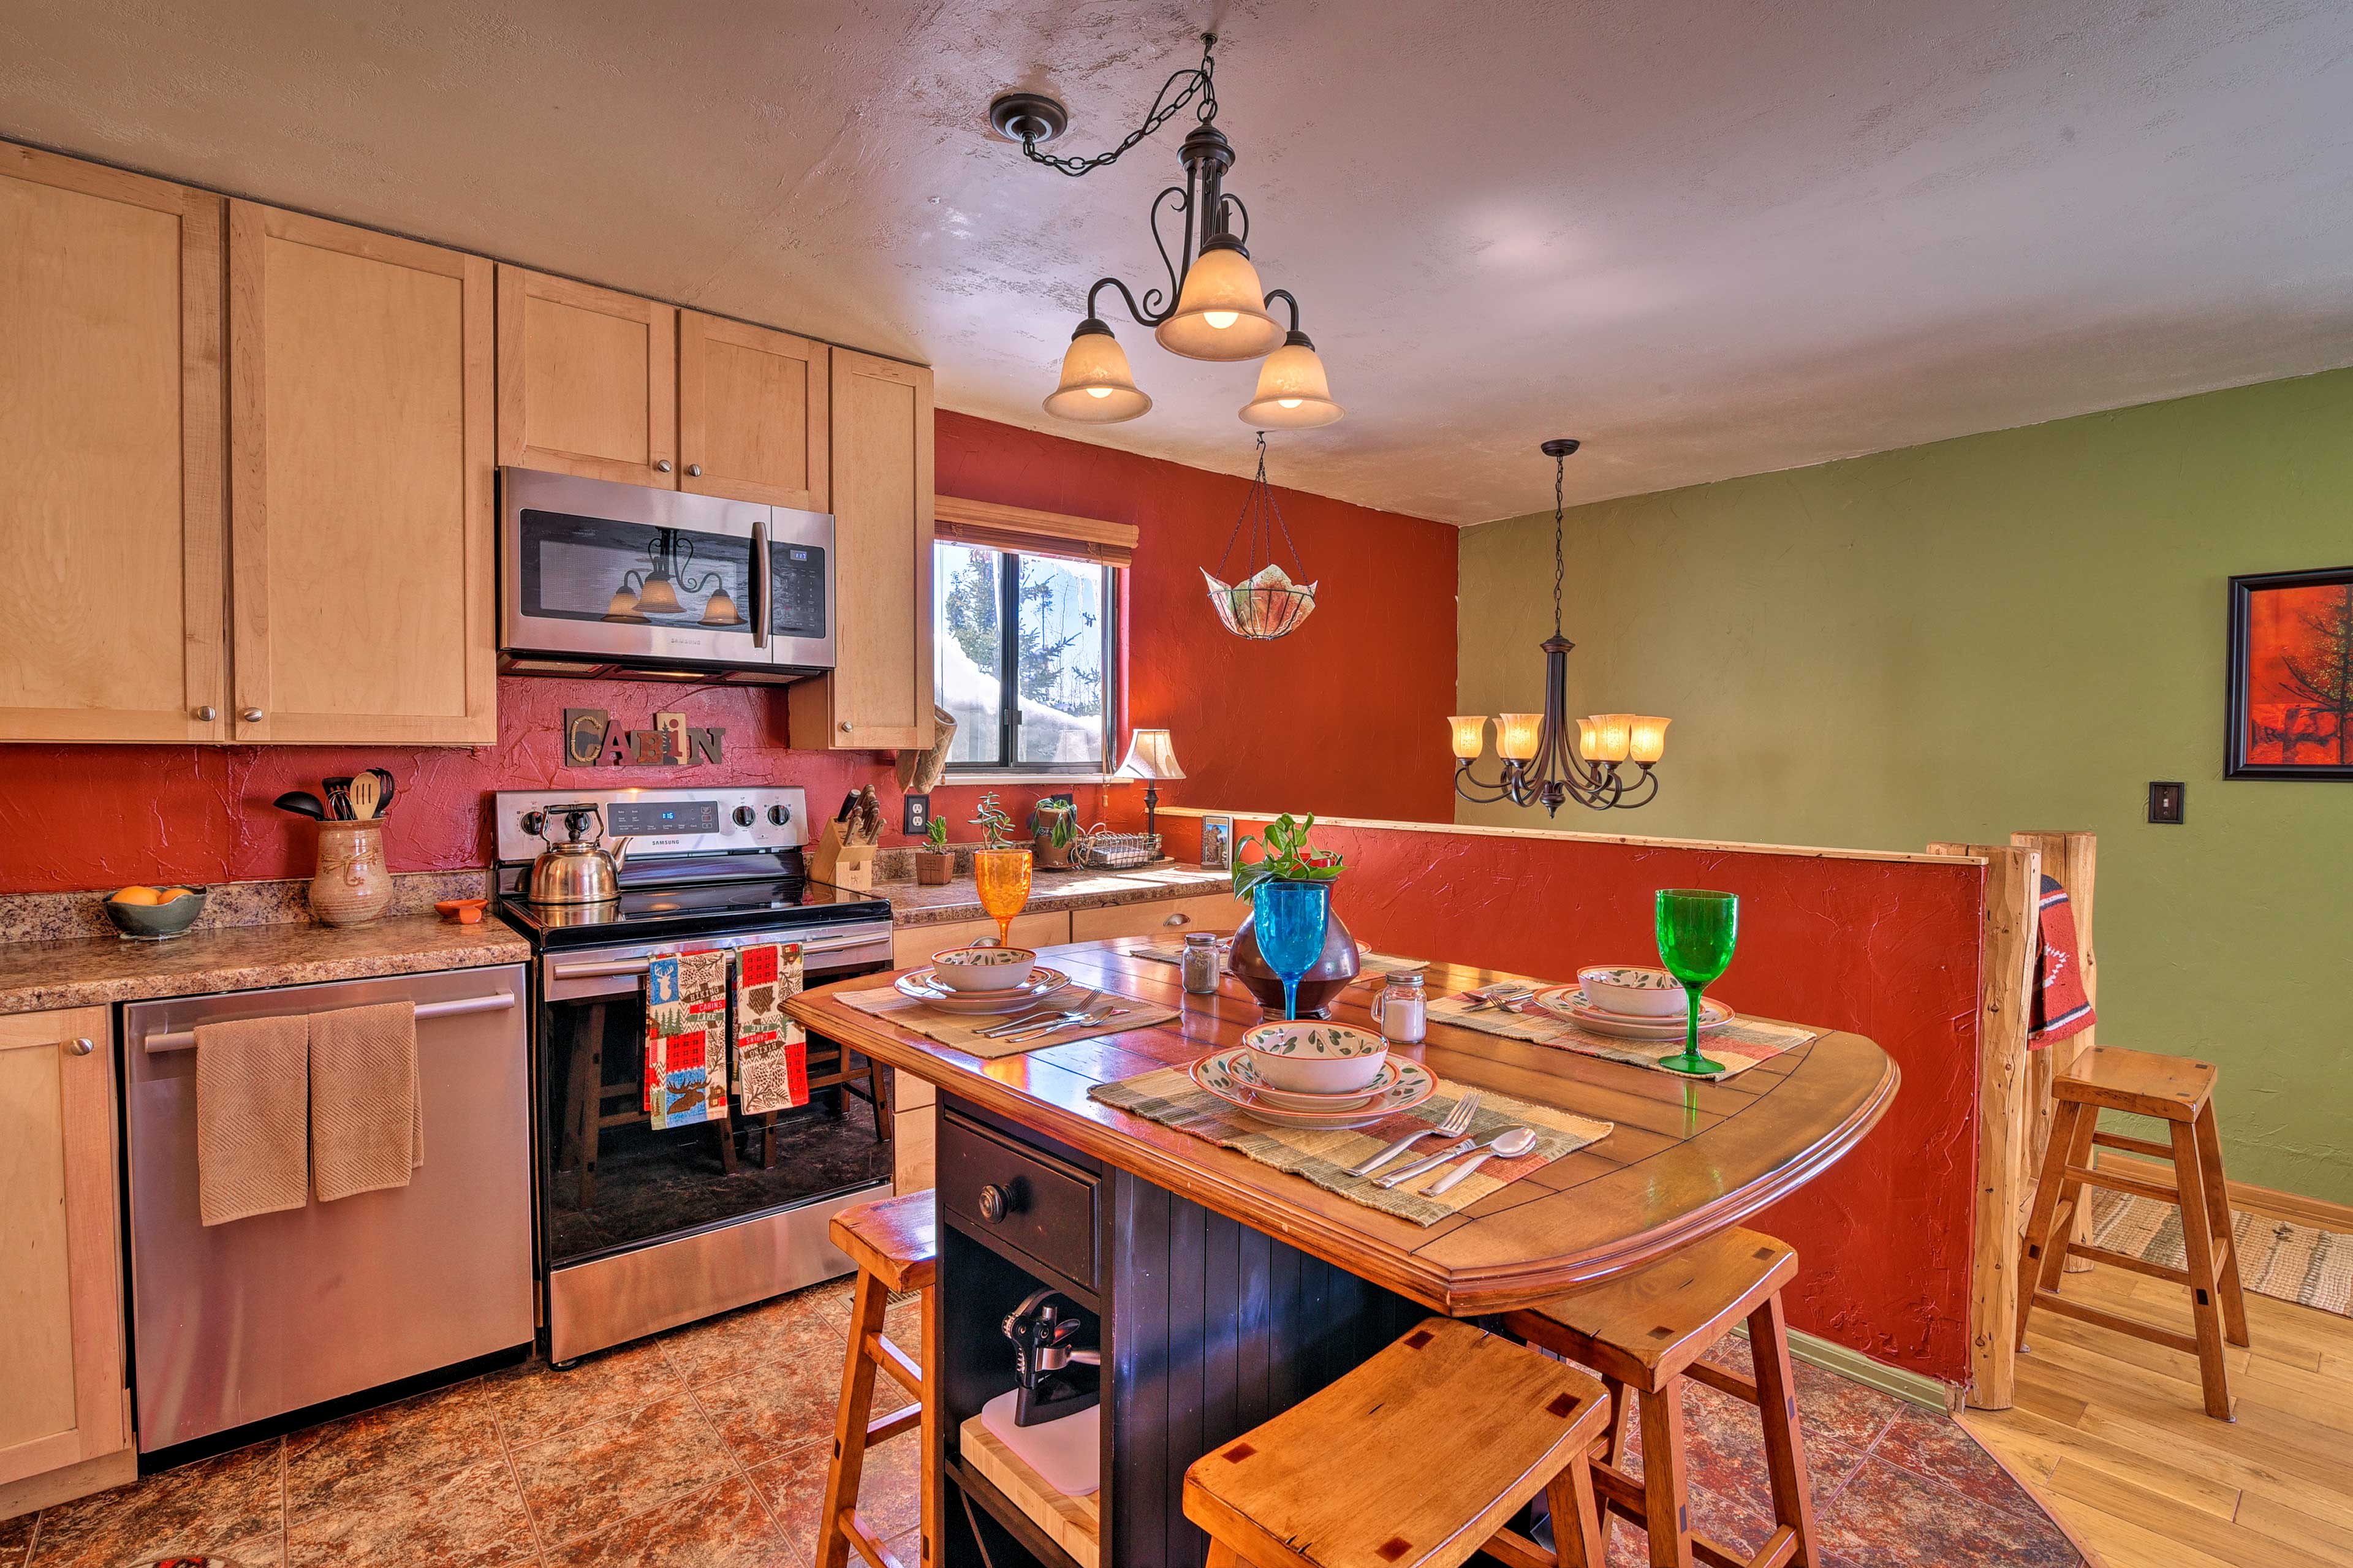 Kitchen | Fully Equipped | Stainless Steel Appliances | Granite Counters